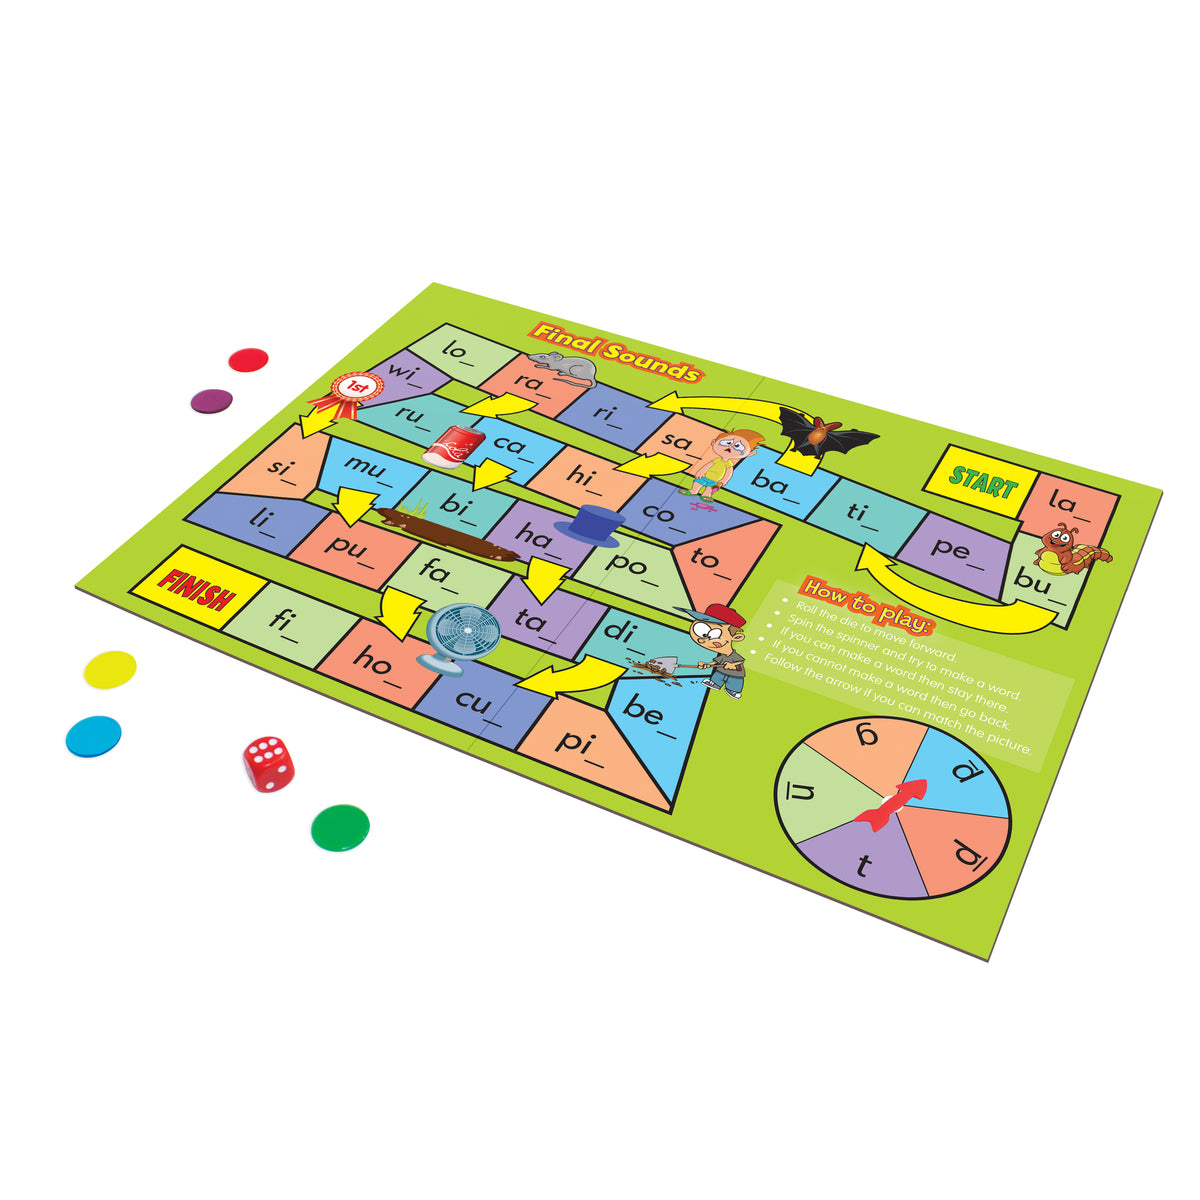 Junior Learning JL422 Final Sounds board game